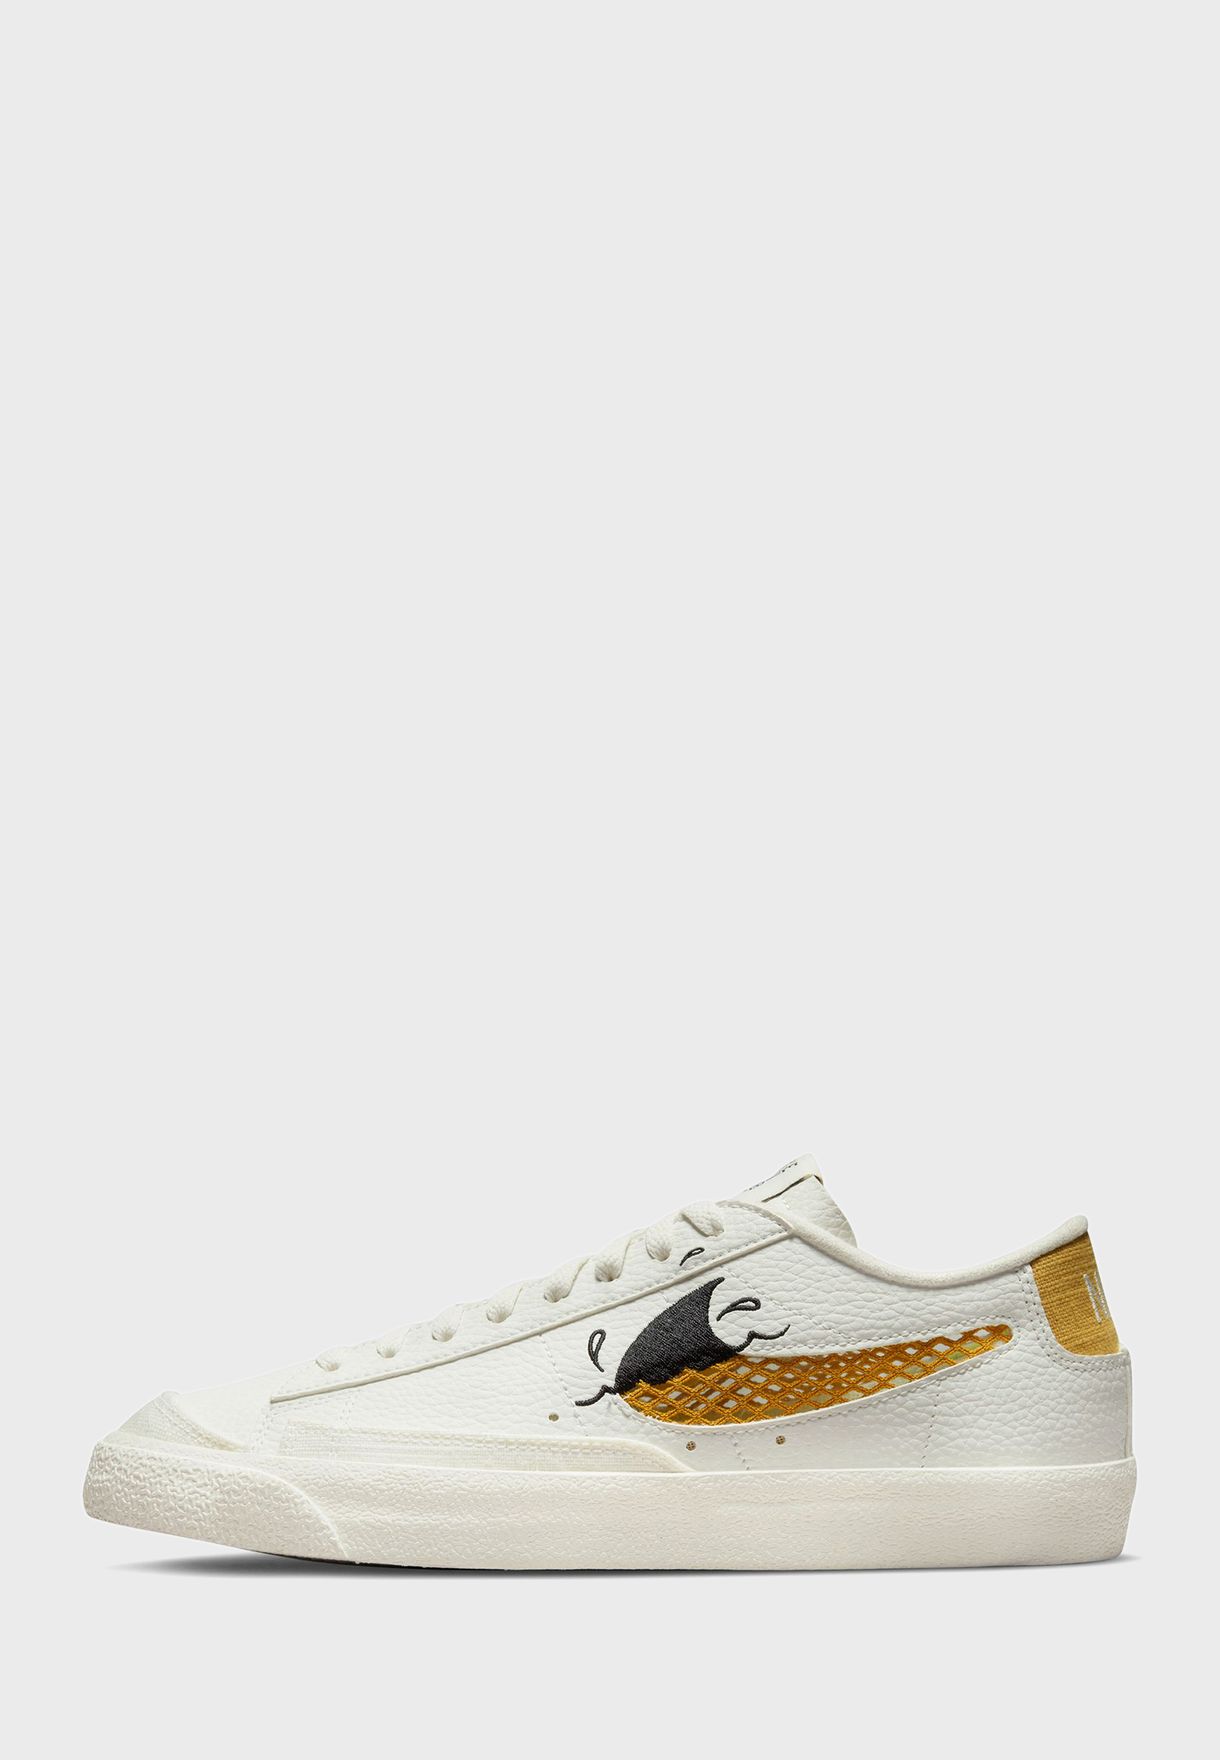 Blazer Low '77 Special Edition Nsc Sneakers